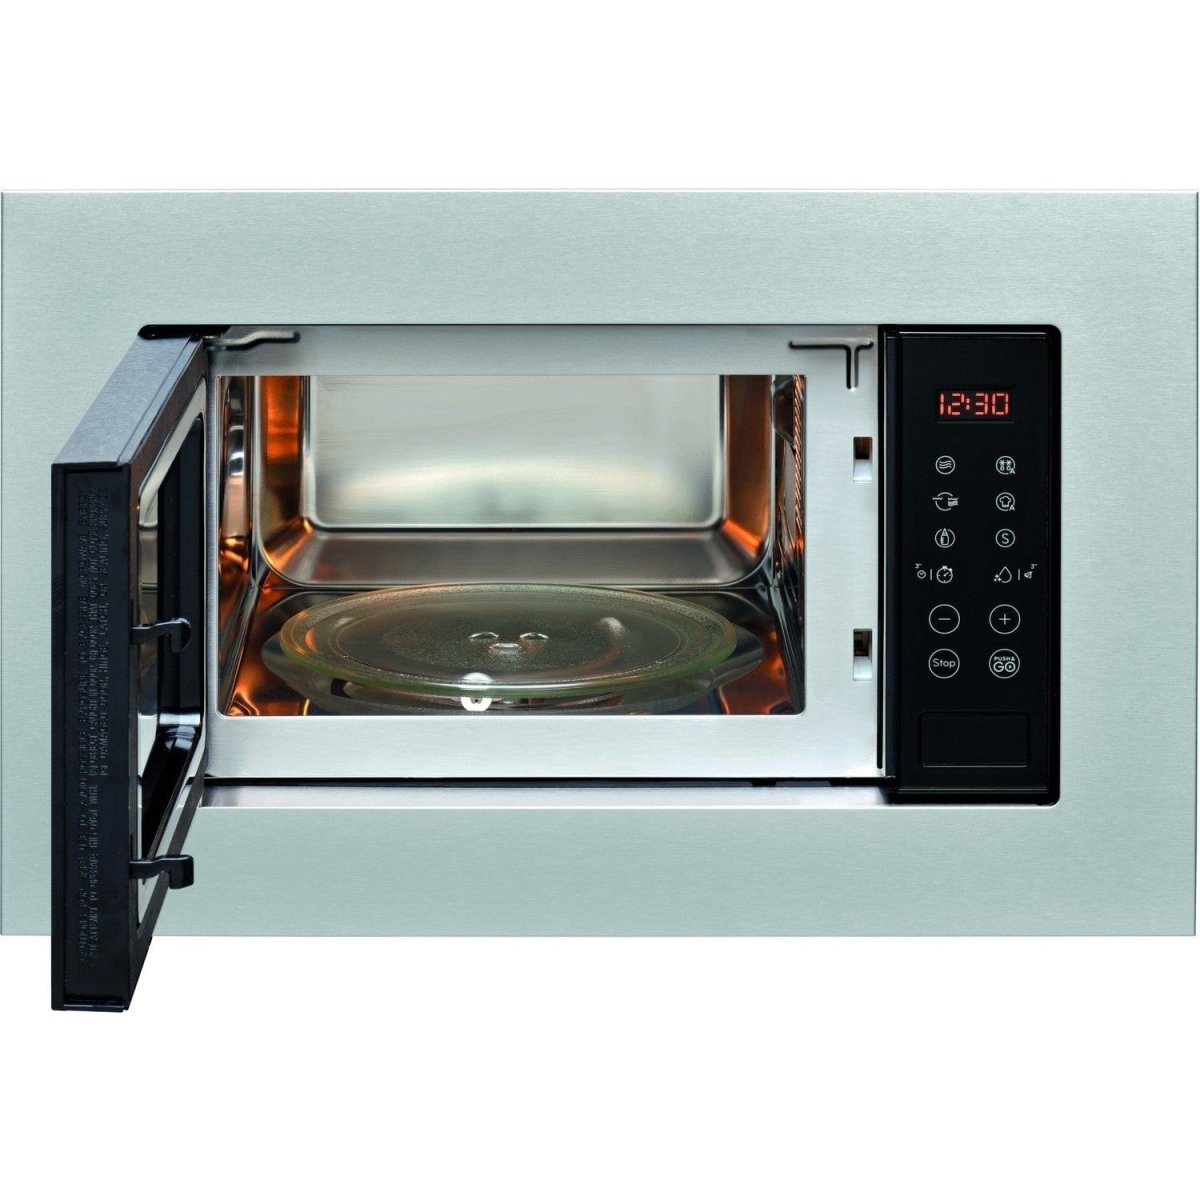 Indesit MWI120GXUK 800 Watt 20 Litre Built-In Microwave Oven With Grill | Atlantic Electrics